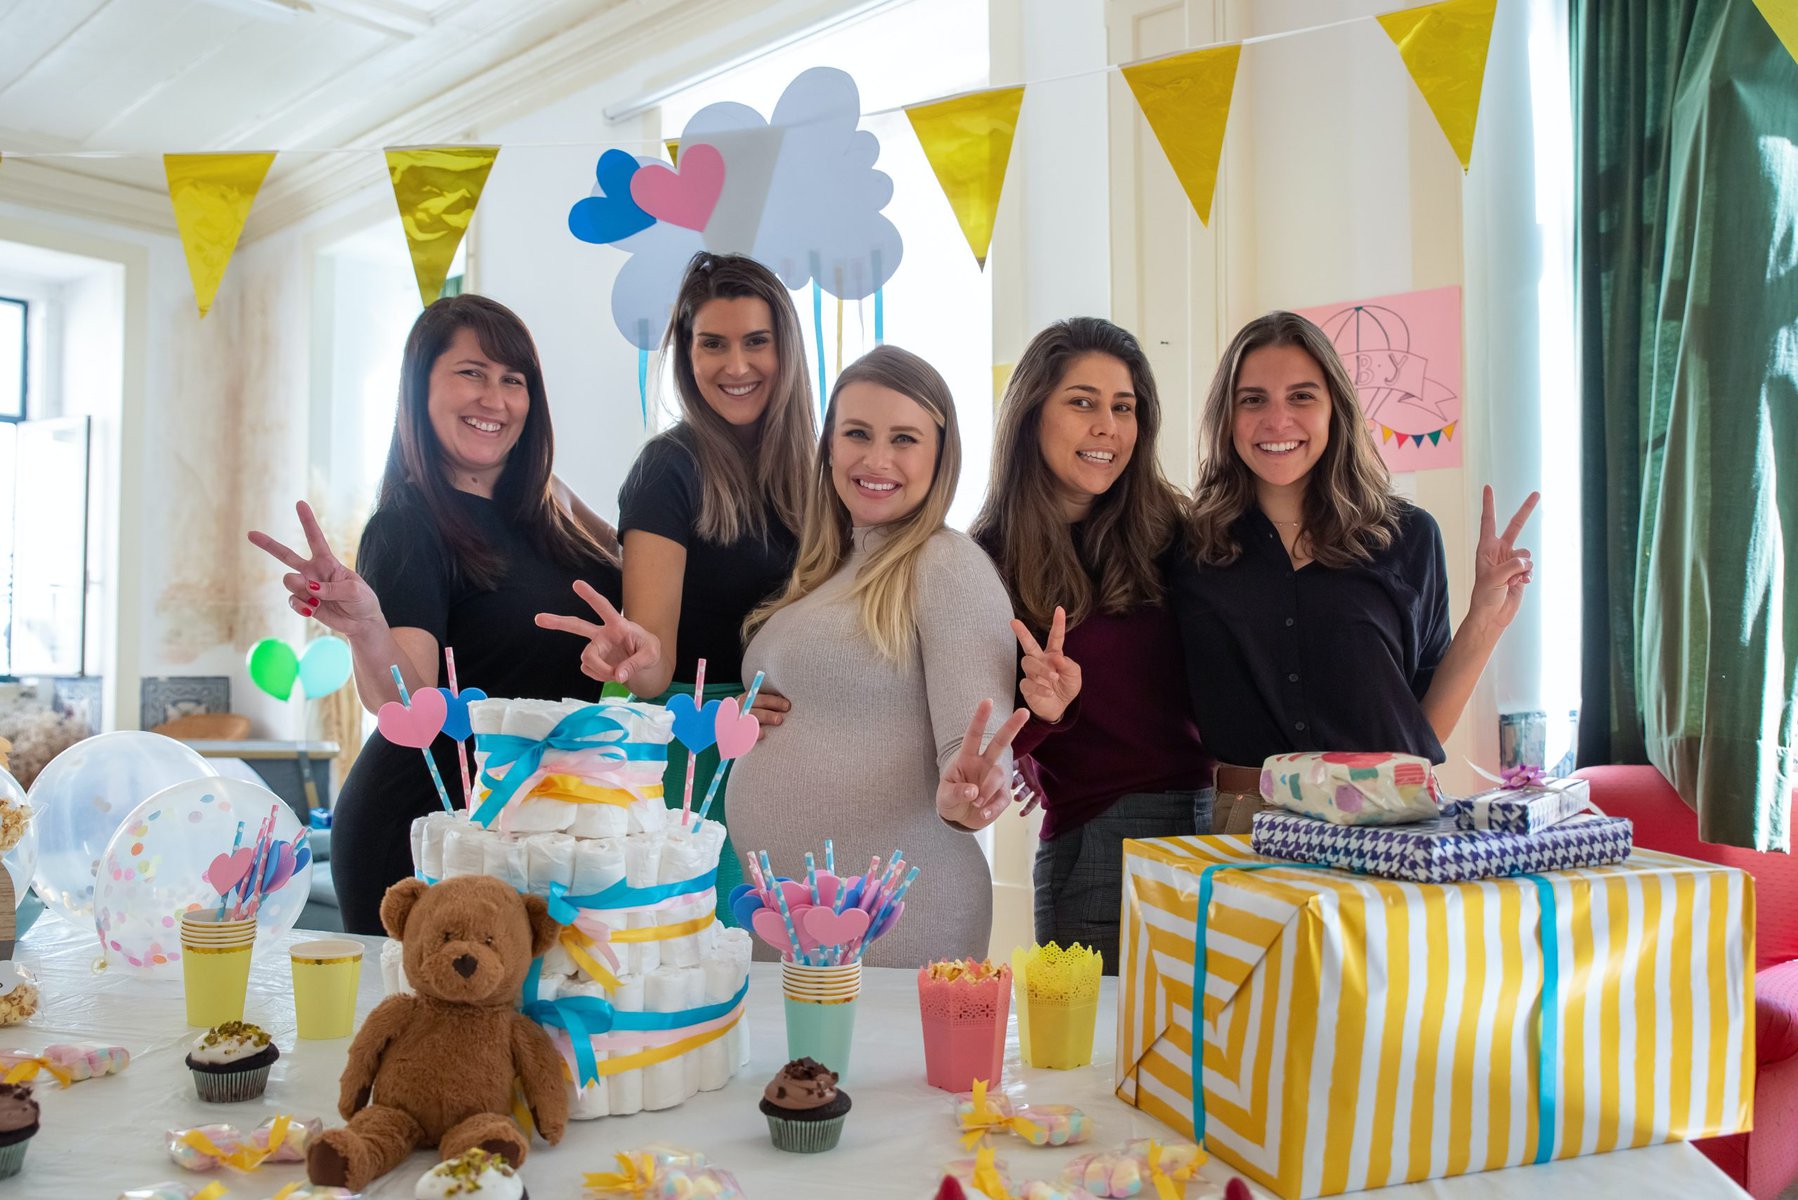 8 Pop Song Themes That Will Make Your Baby Shower Unique